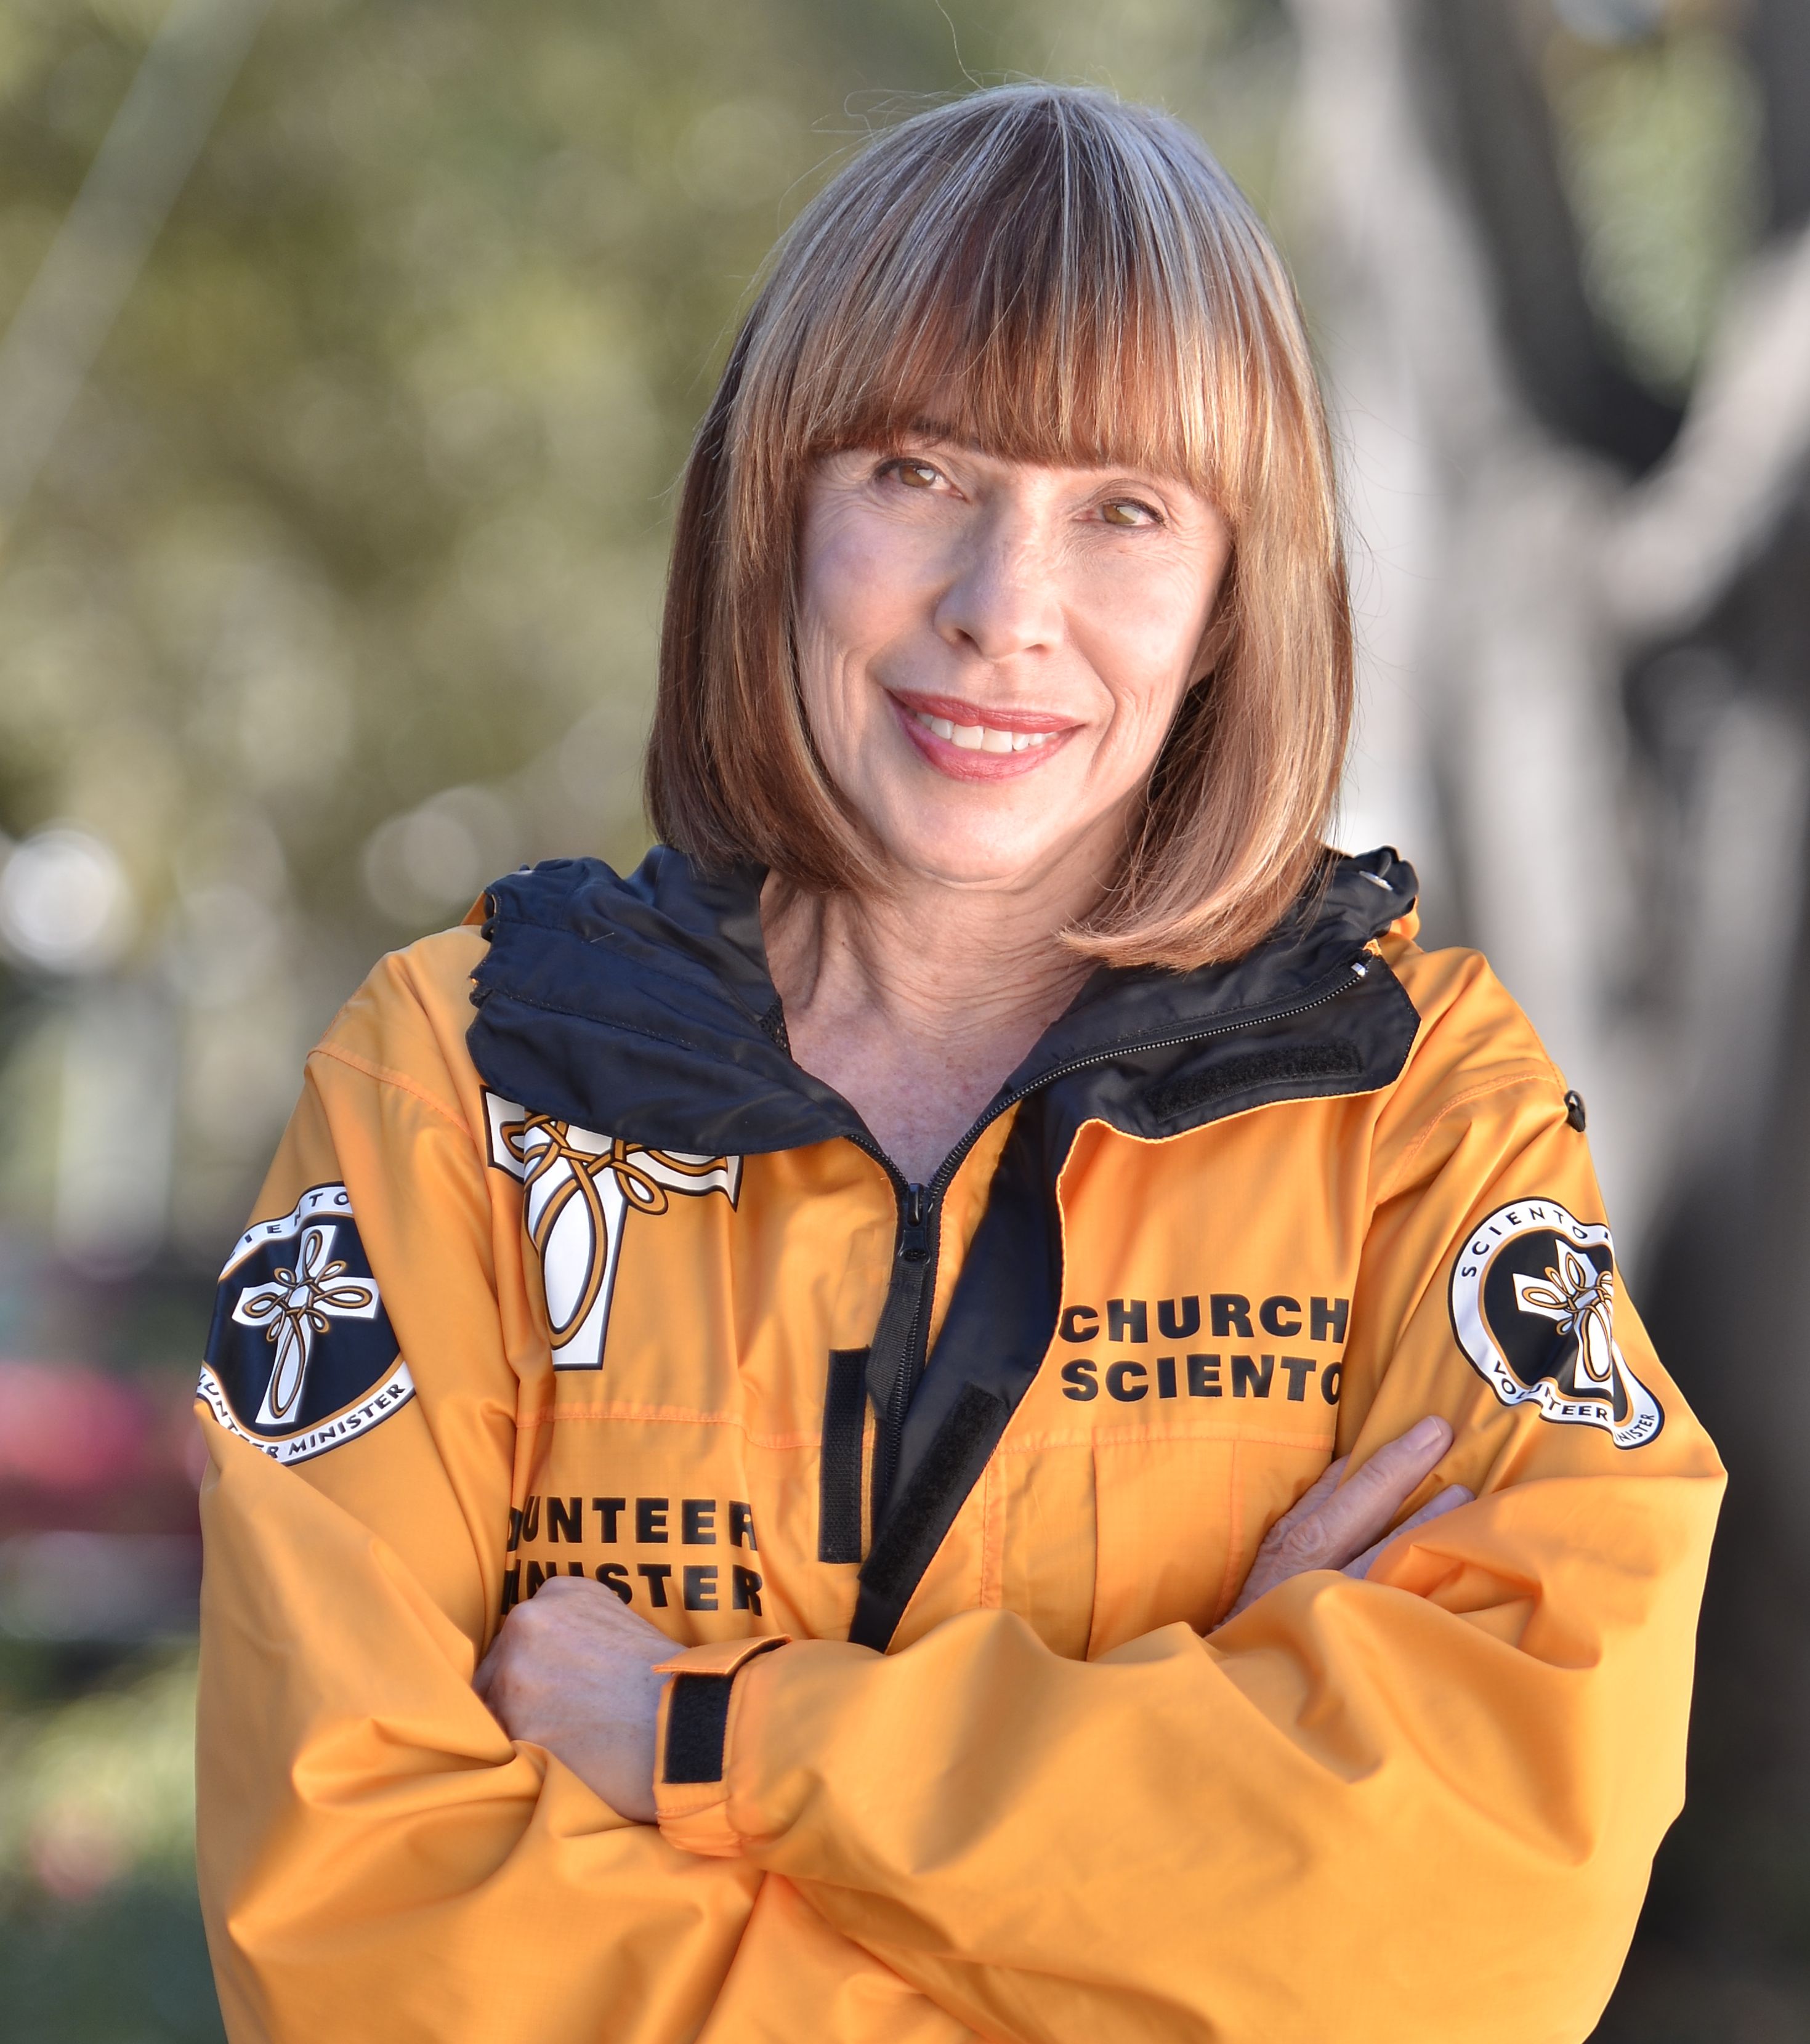 Gracia Bennish, featured in a recent edition of Freedom Magazine, was part of the Scientology Volunteer Ministers Disaster Response Team caring for rescue workers in the aftermath of the September 11.